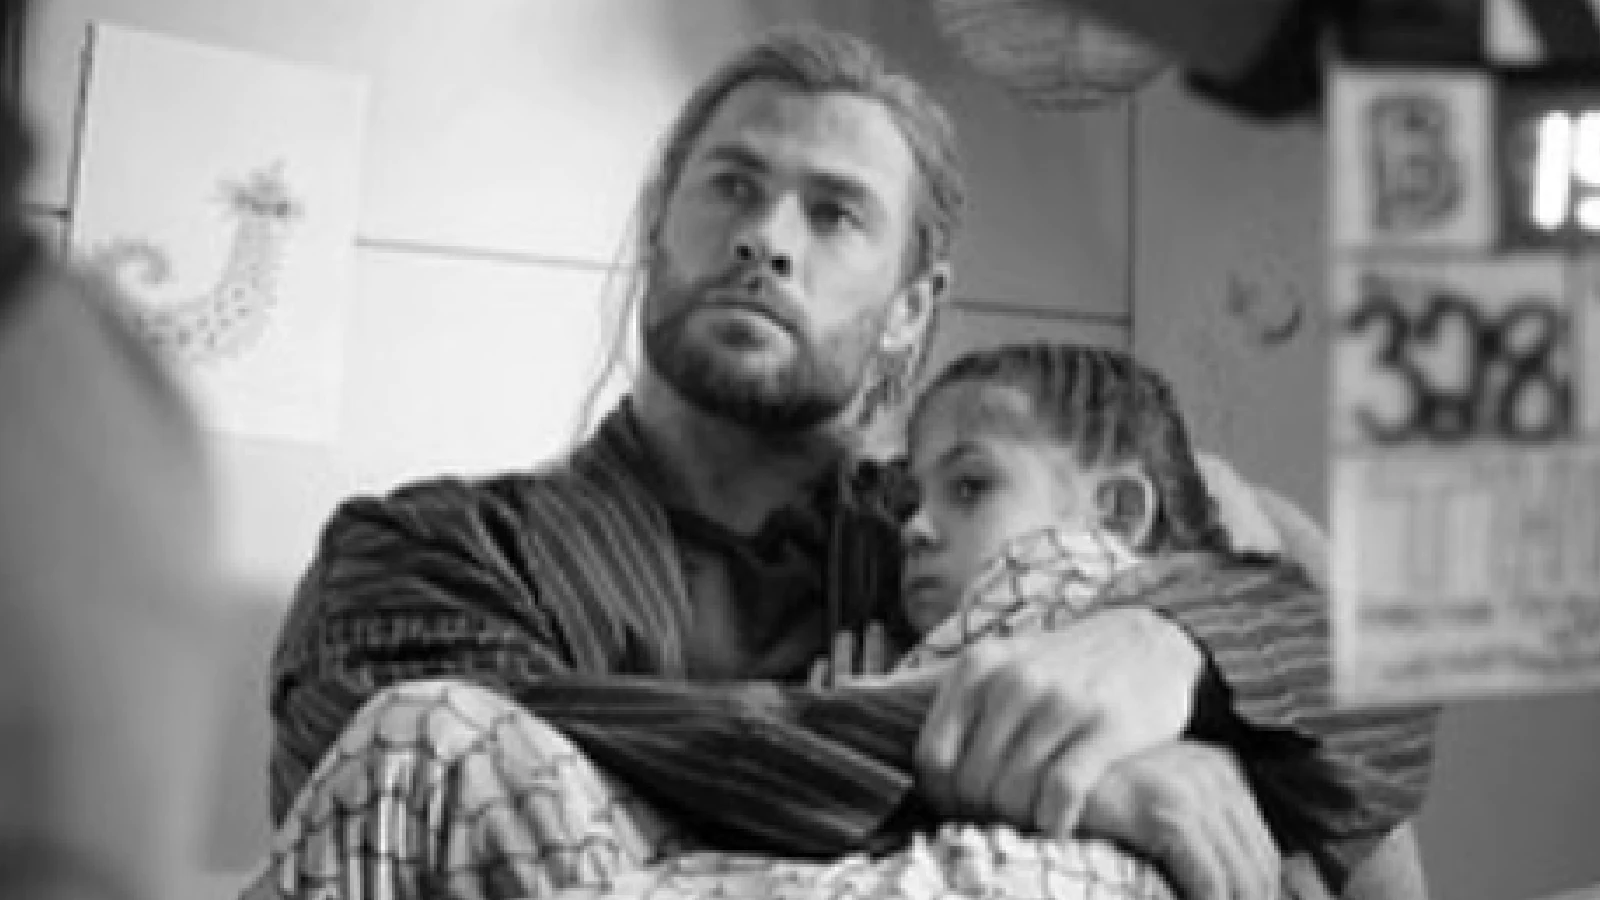 Chris Hemsworth Terms Daughter India Rose His ‘Favourite Superhero’; See Adorable Pic From Thor Sets